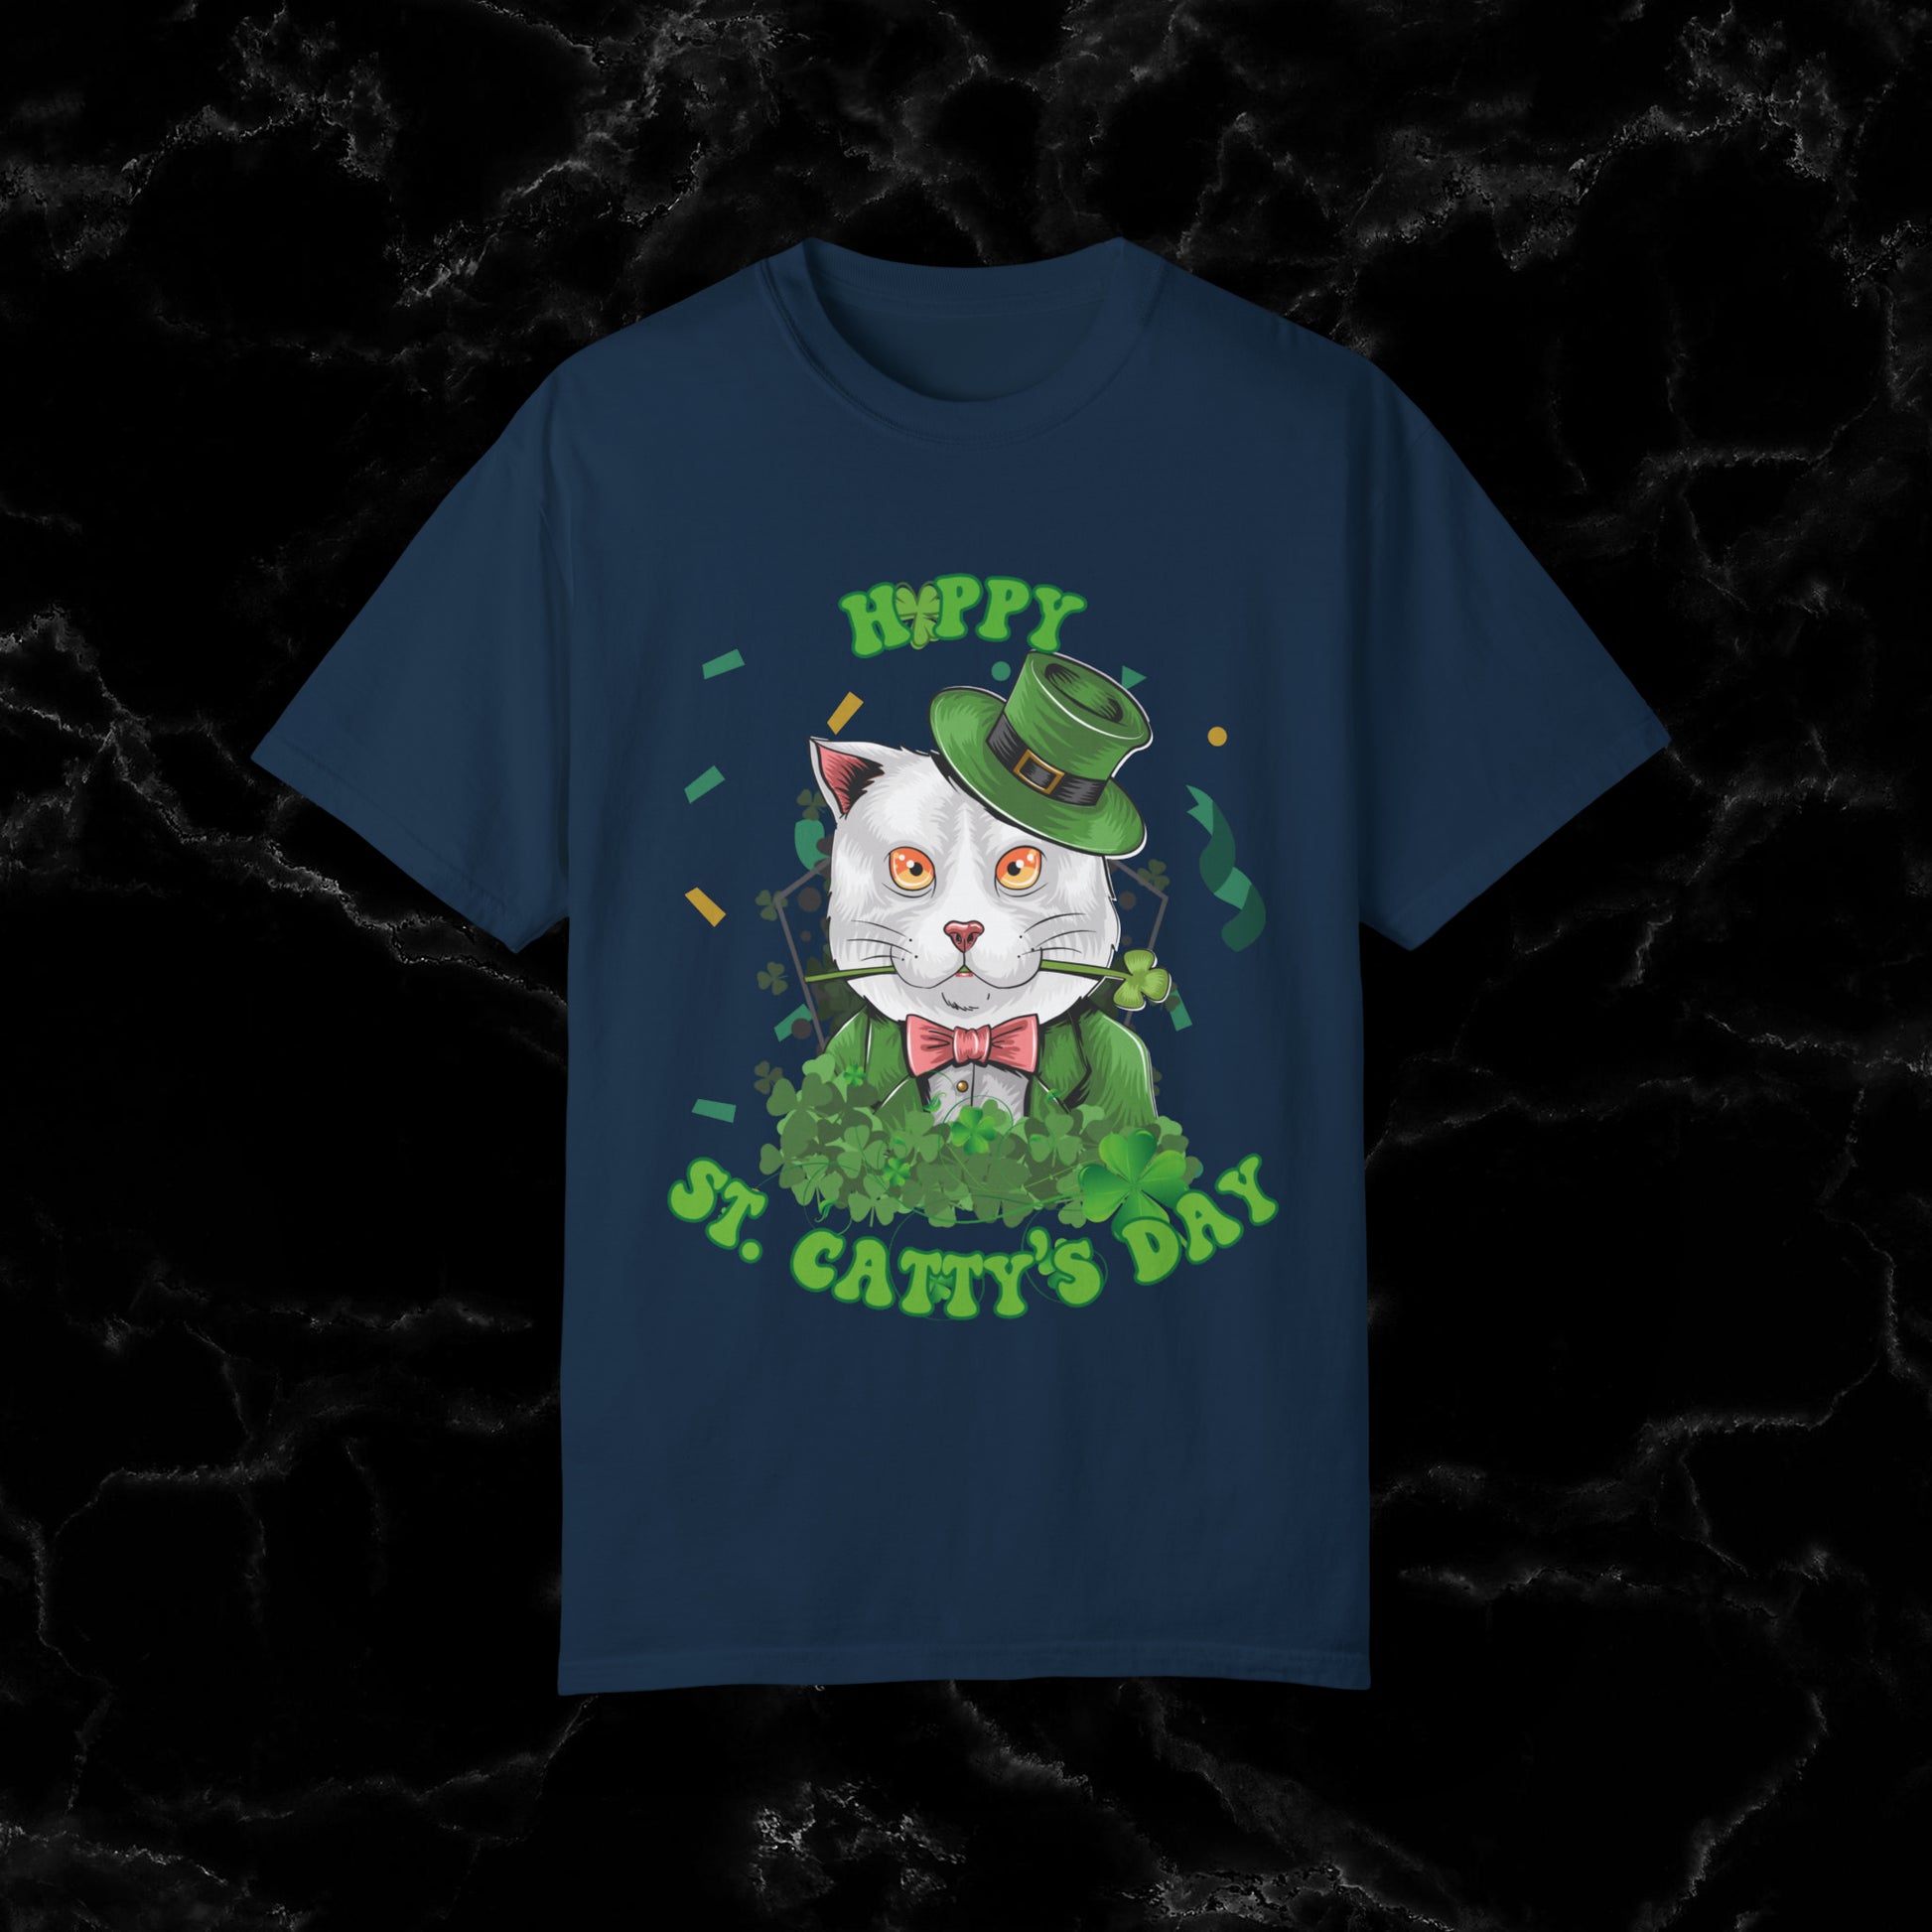 Happy St. Catty's Day Funny St. Patrick's Day Comfort Colors T-Shirt - St. Paddy's Day Shirt for Cat Lover St. Patty's Day Fun T-Shirt True Navy S 